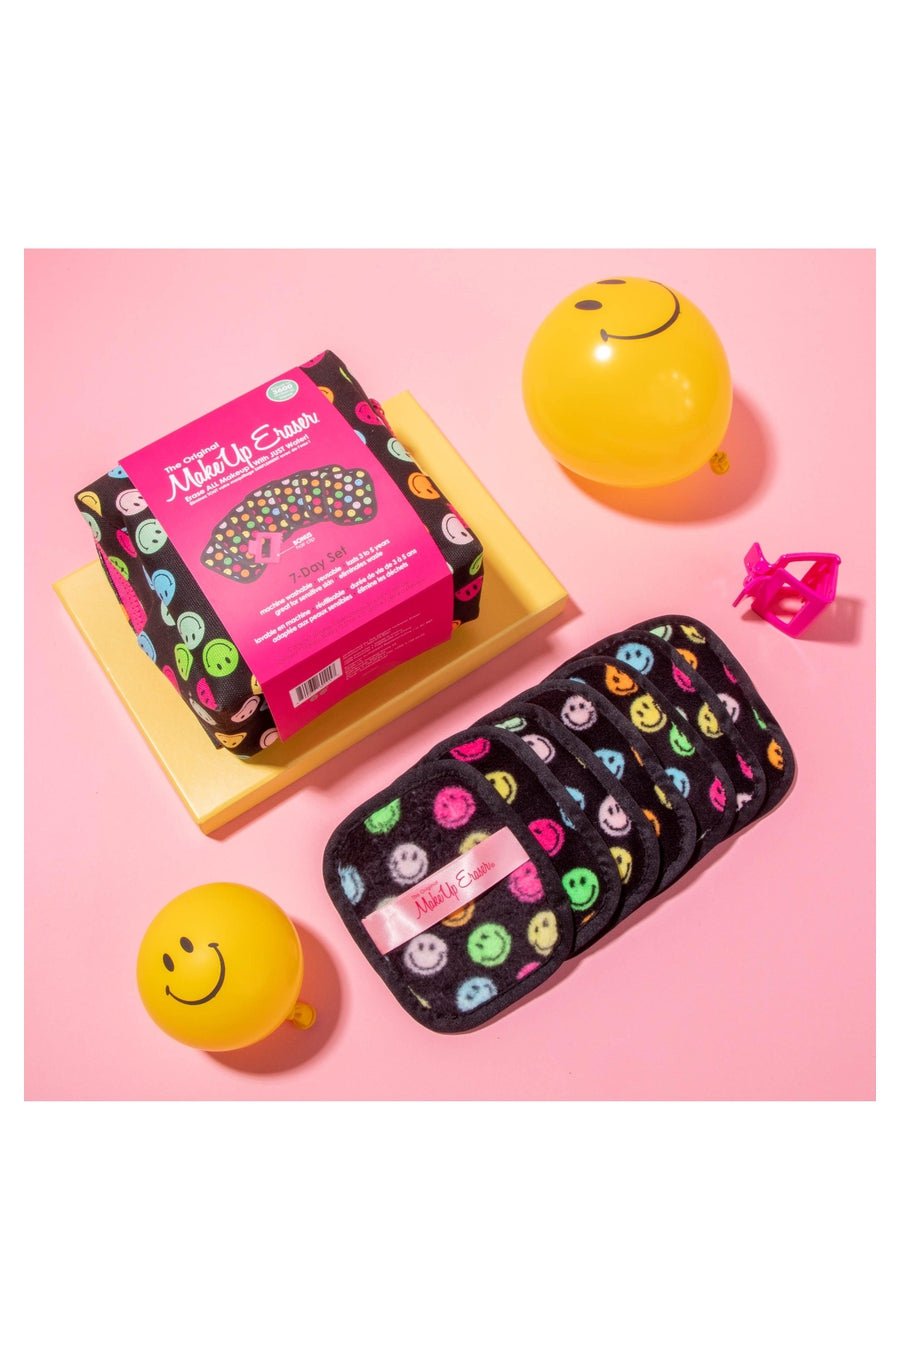 Shop Makeup Eraser Smiley 7-Day Set - Premium Beauty Product from Makeup Eraser Online now at Spoiled Brat 